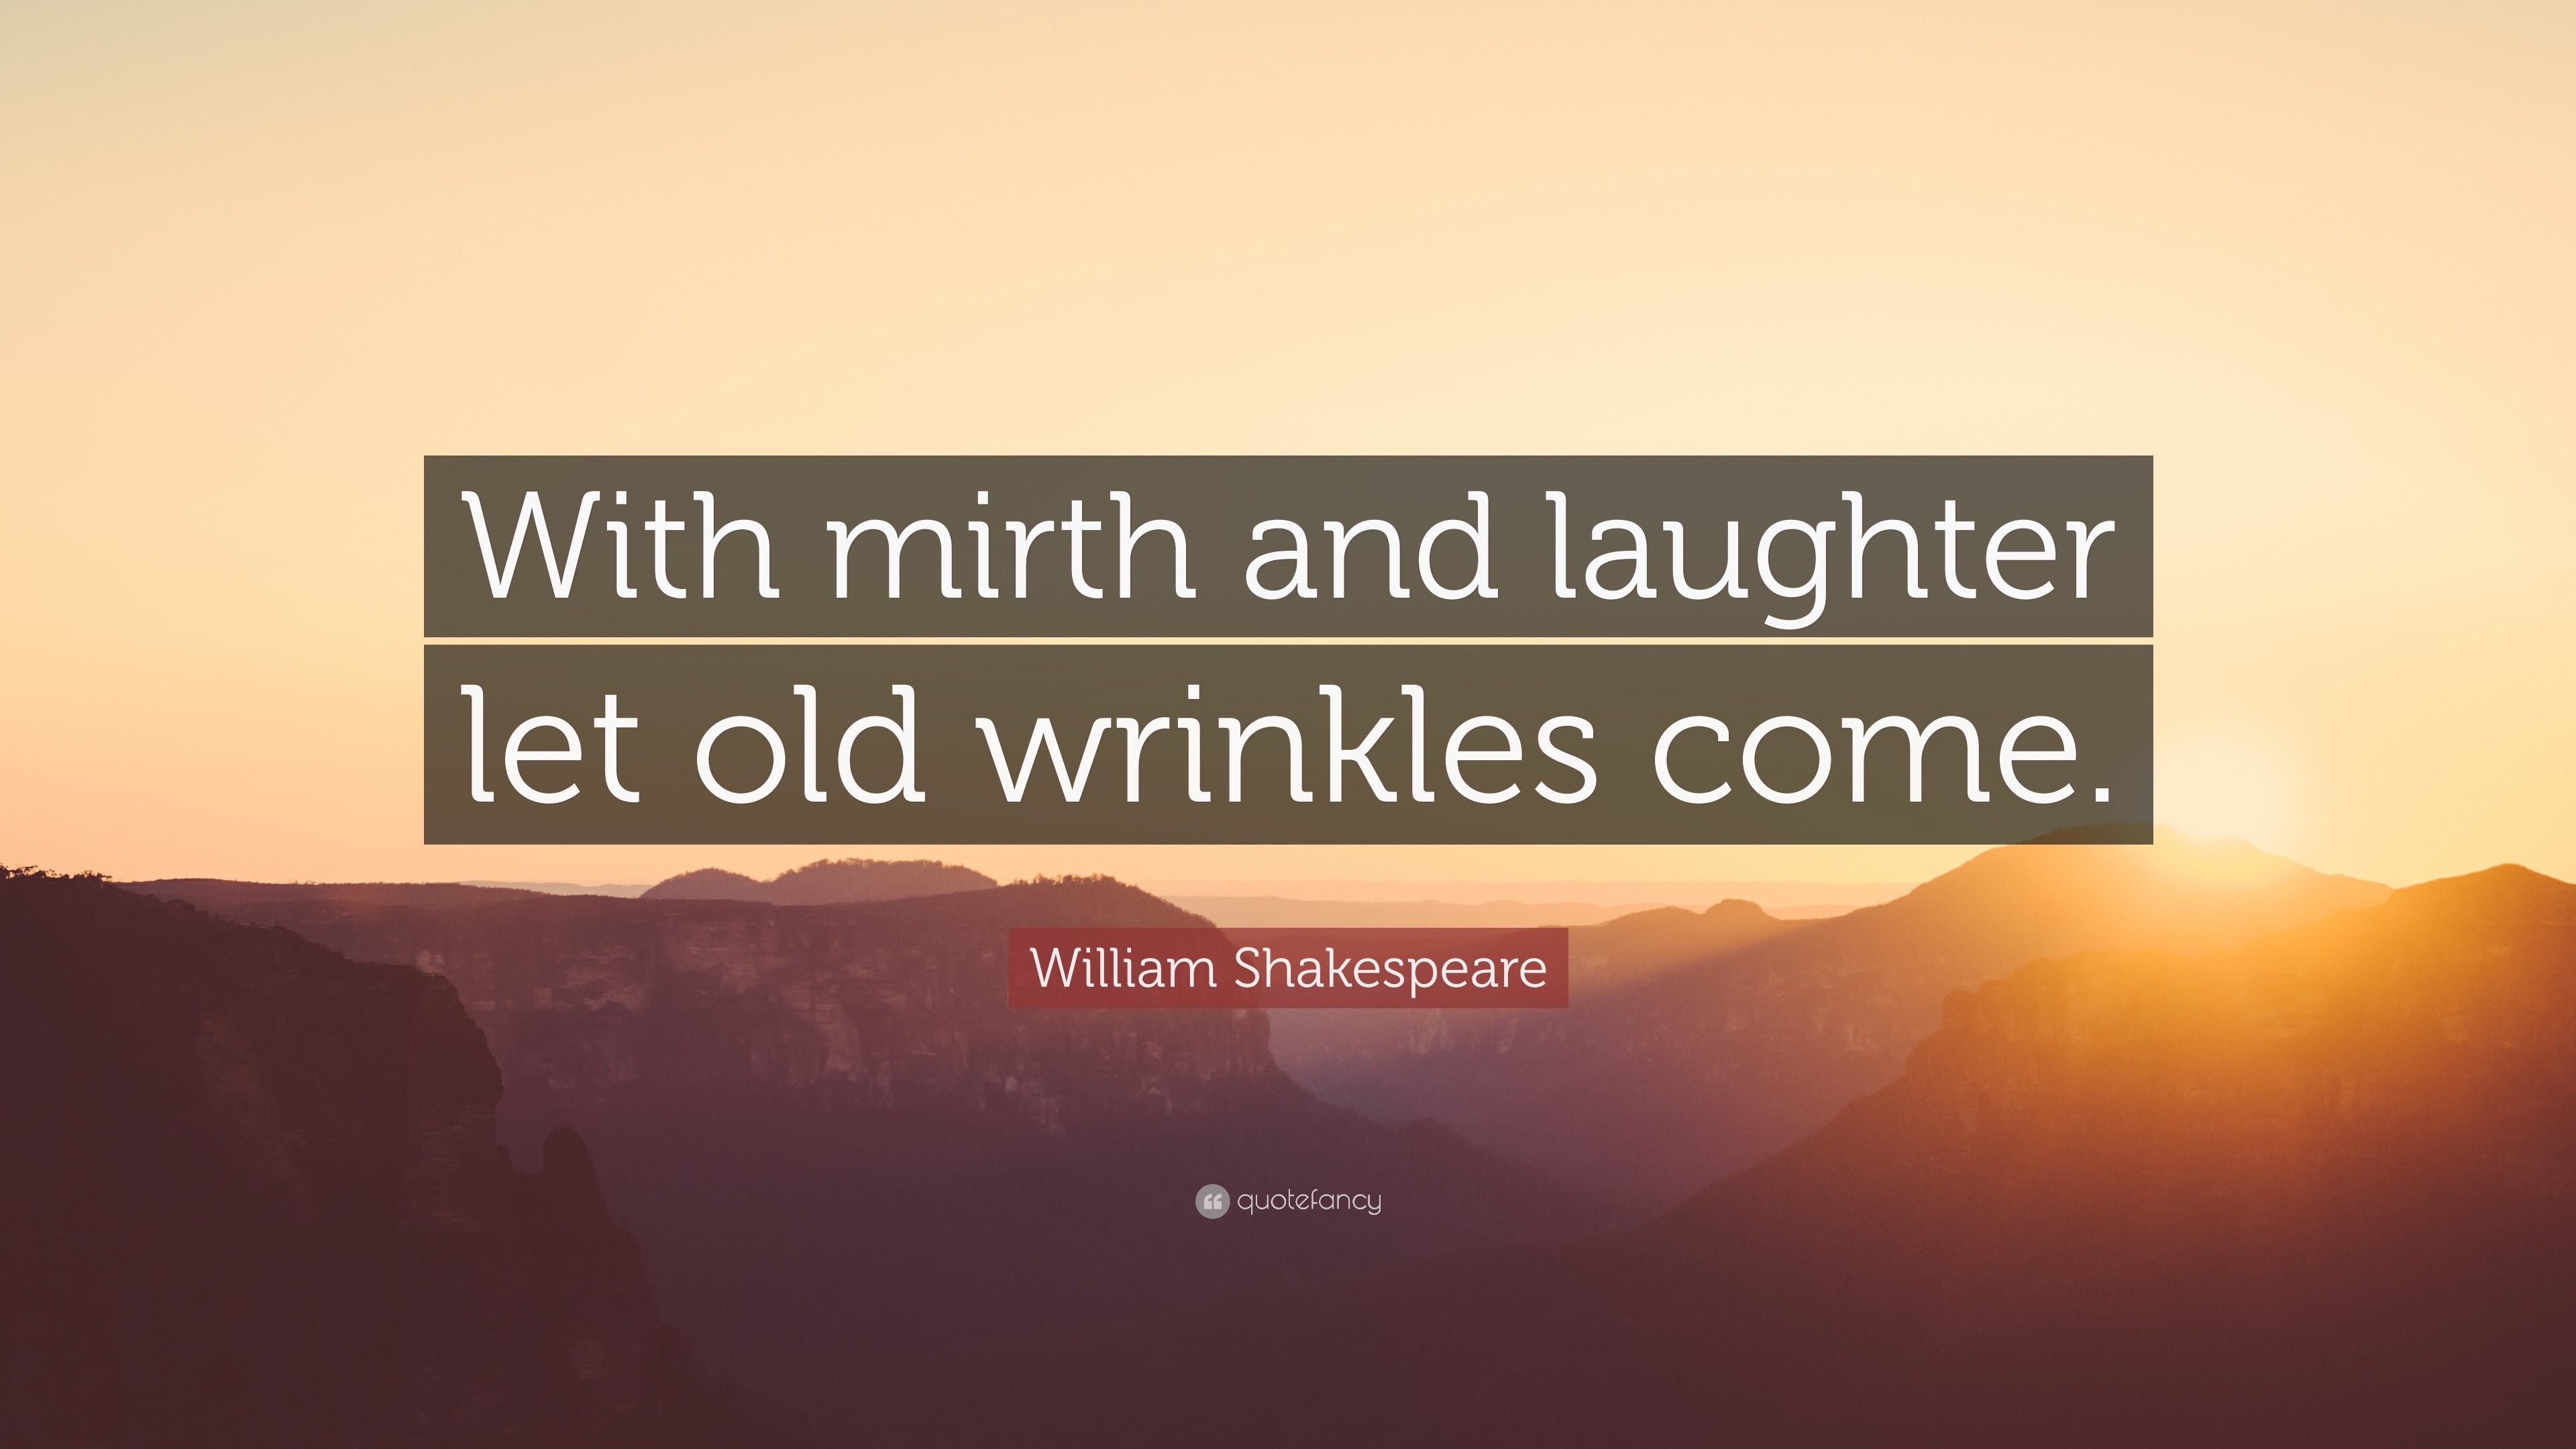 William Shakespeare Quotes (100 wallpapers) - Quotefancy